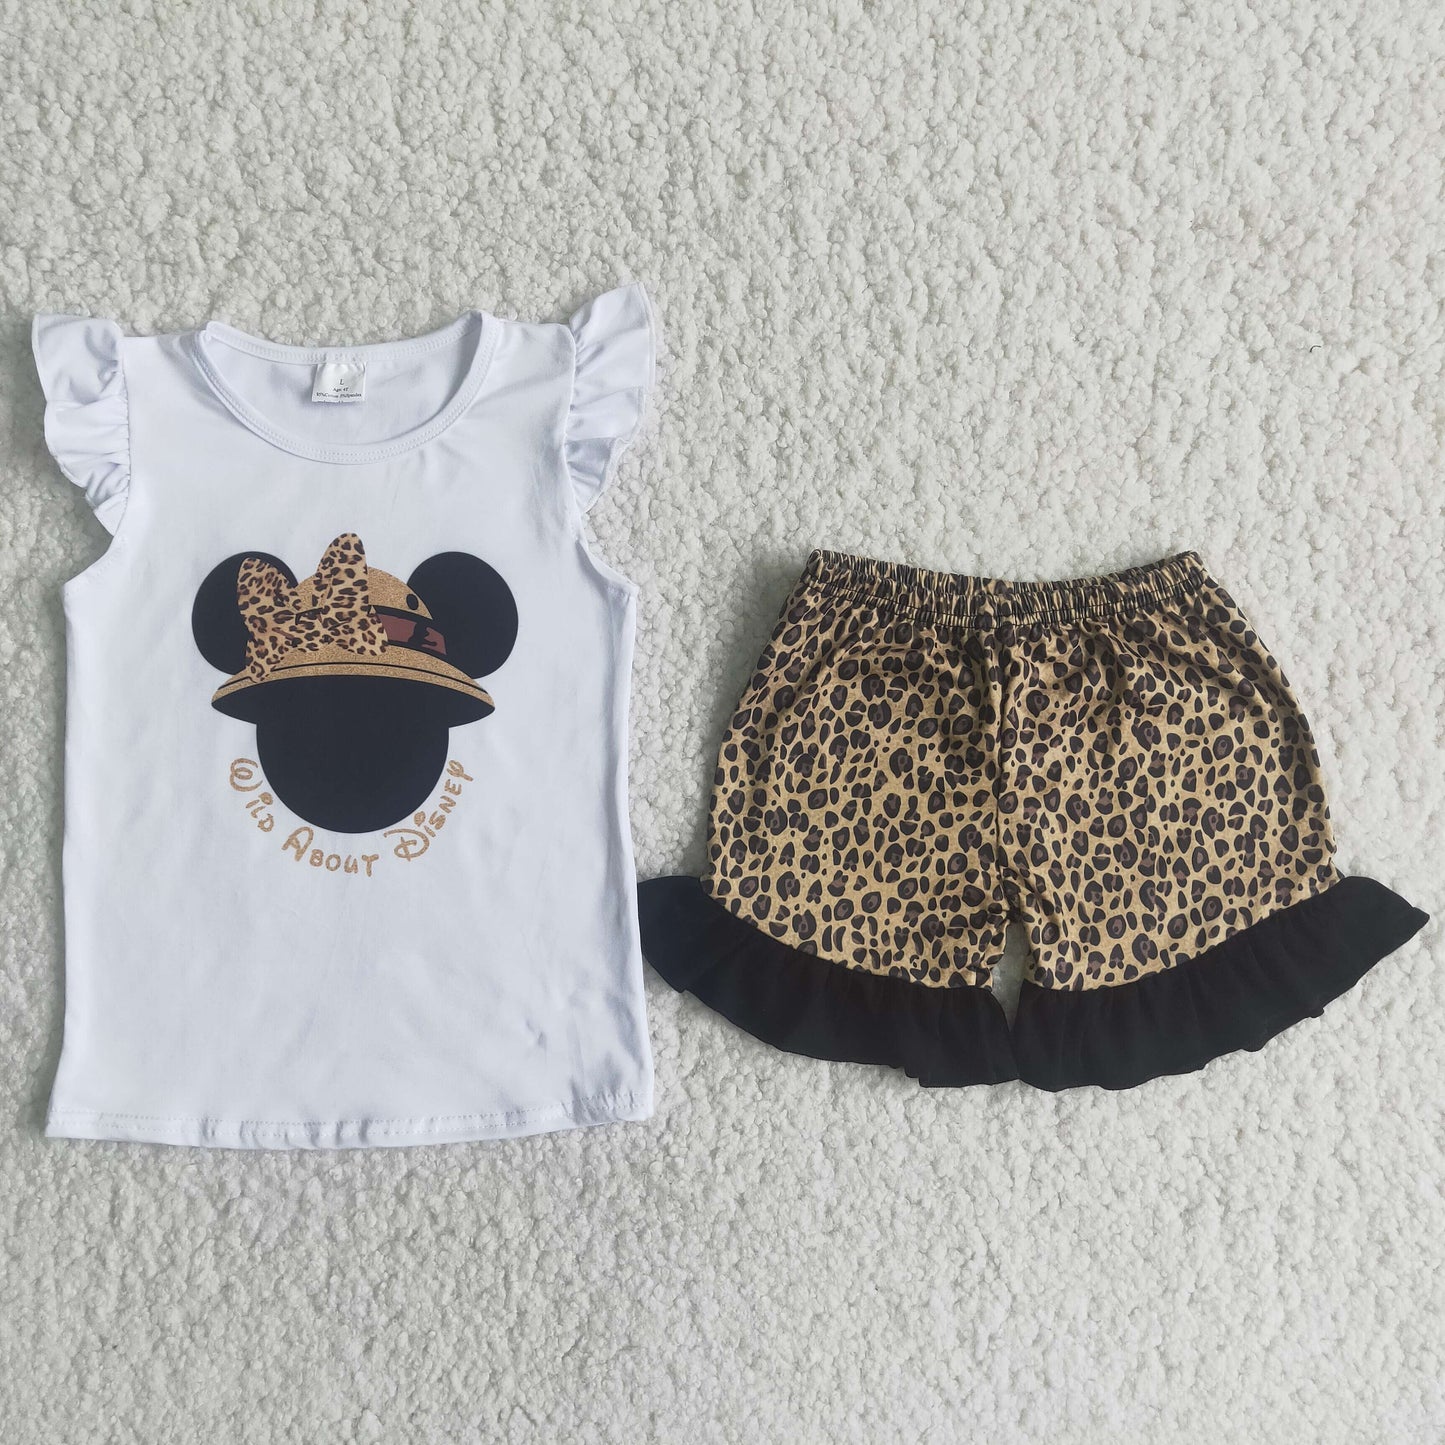 Wild leopard mouse girls boutique summer clothing